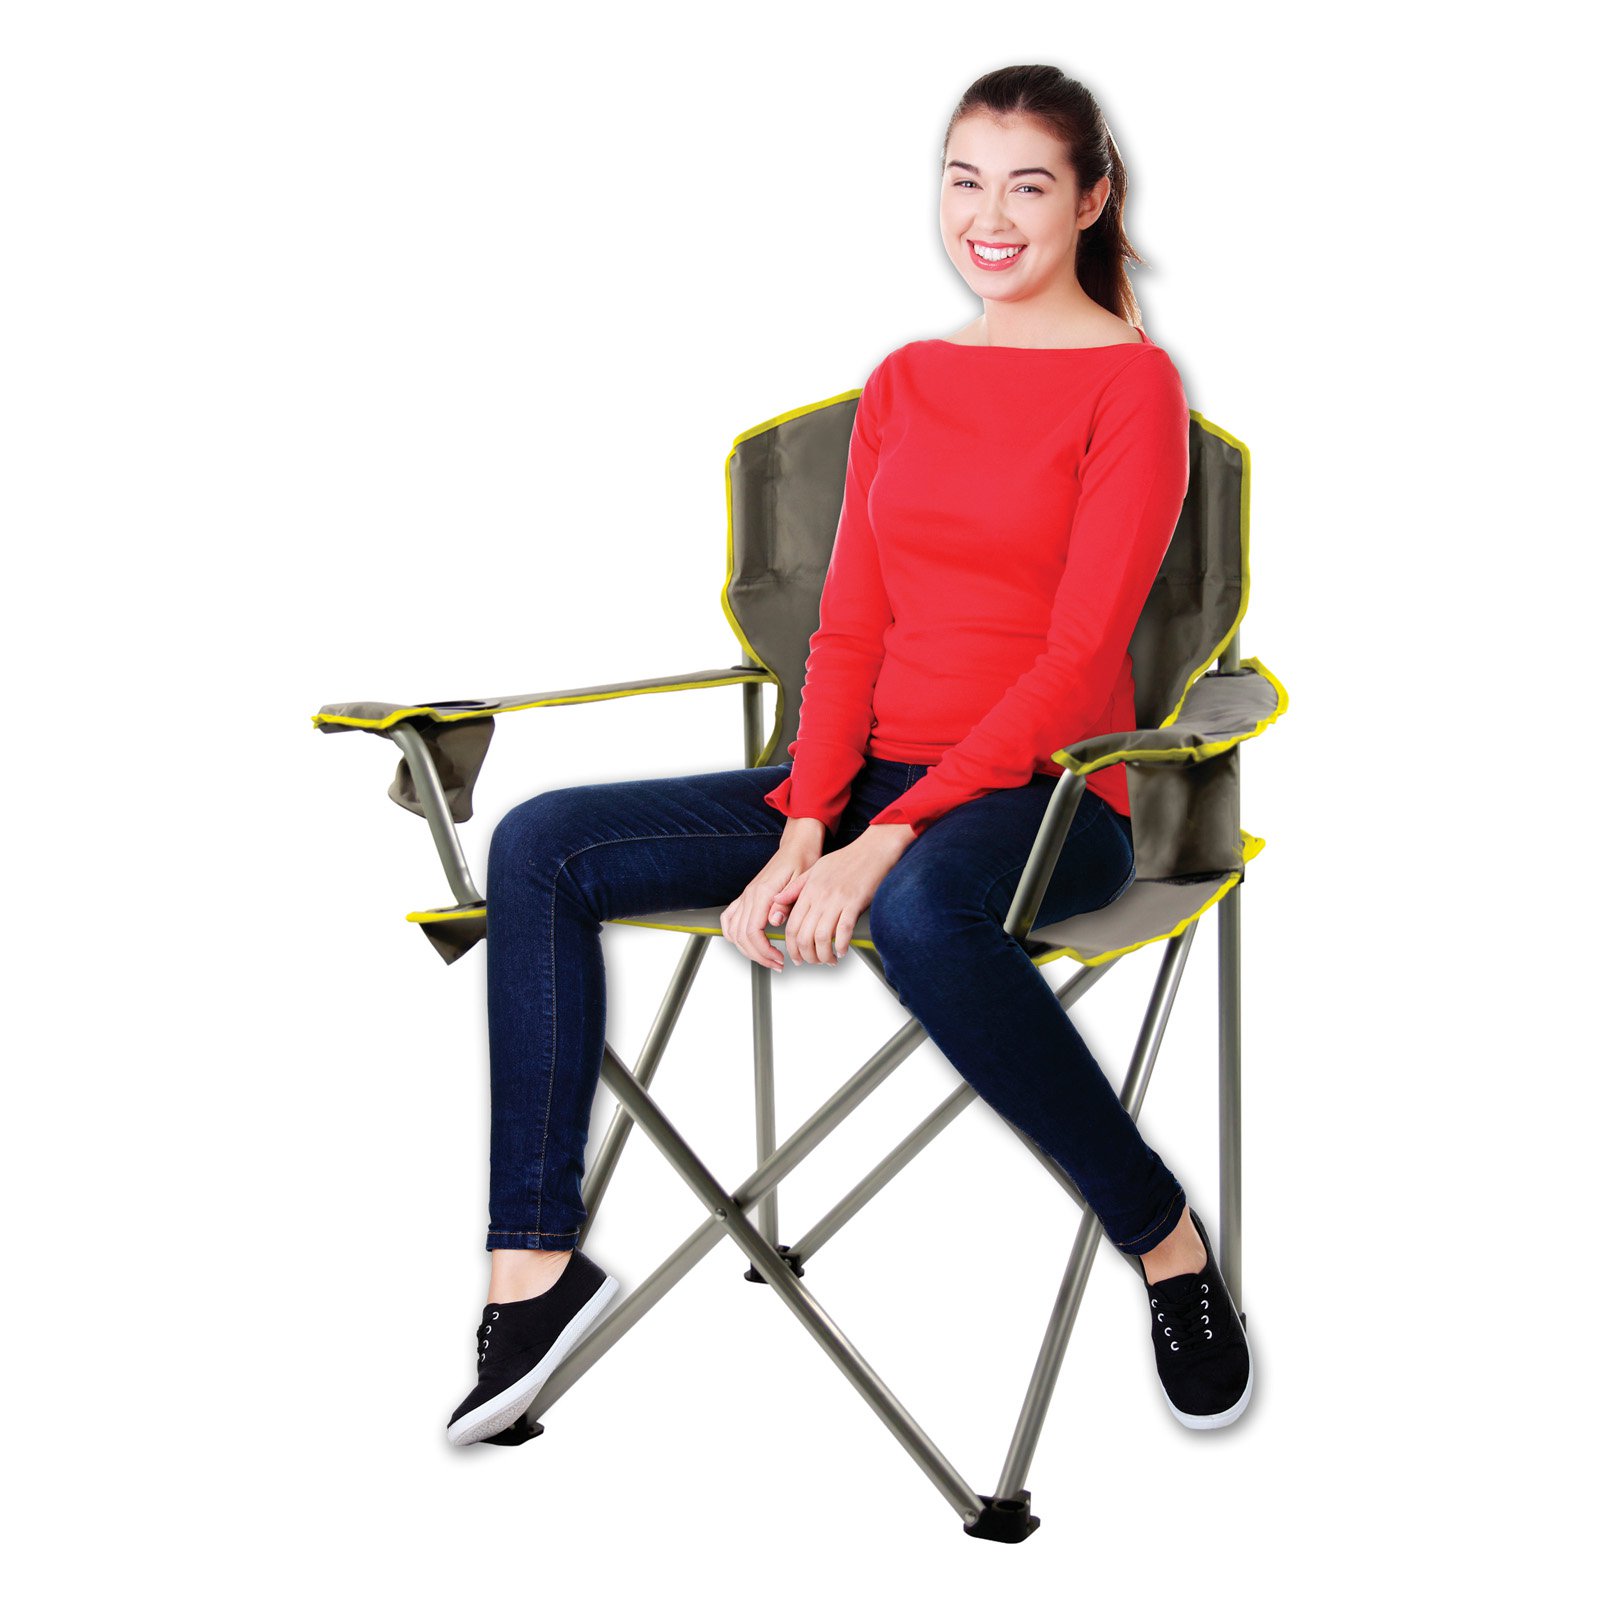 Quik Chair Camping Chair, Gray - image 1 of 6